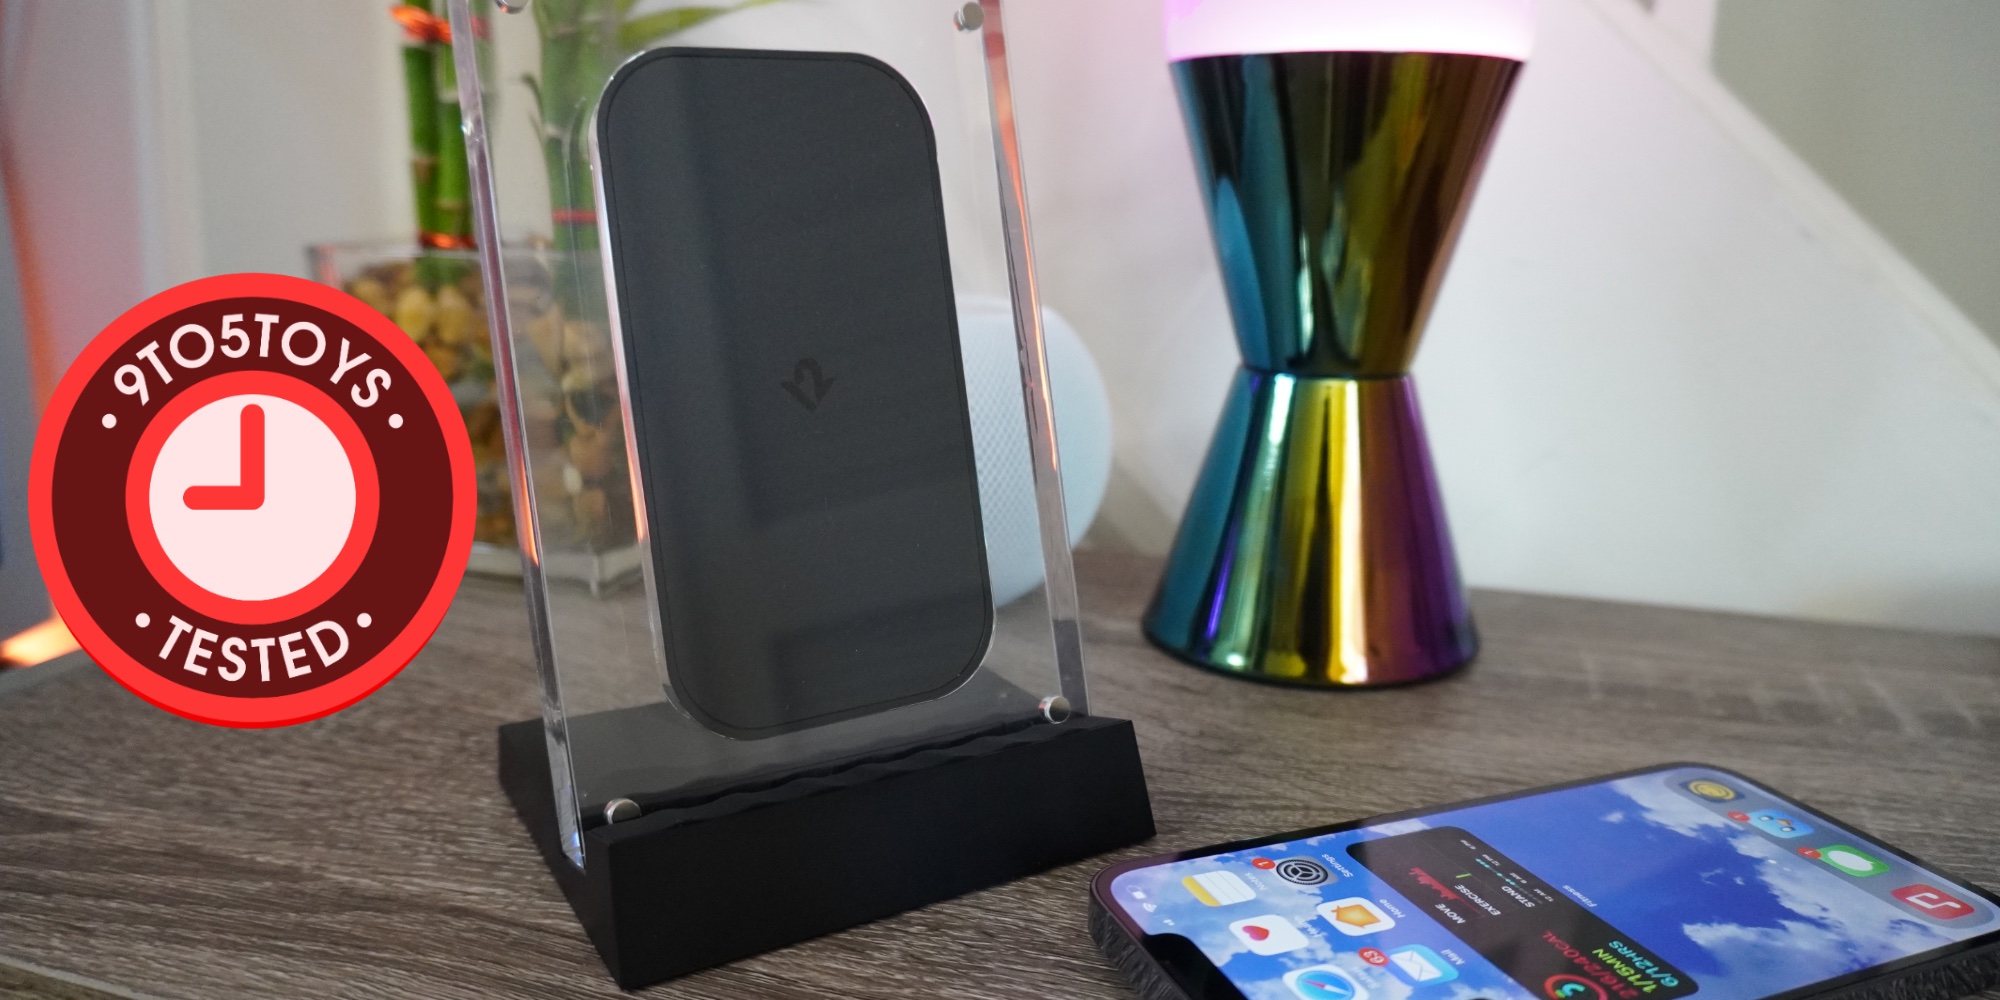 Twelve South PowerPic mod Wireless Charger